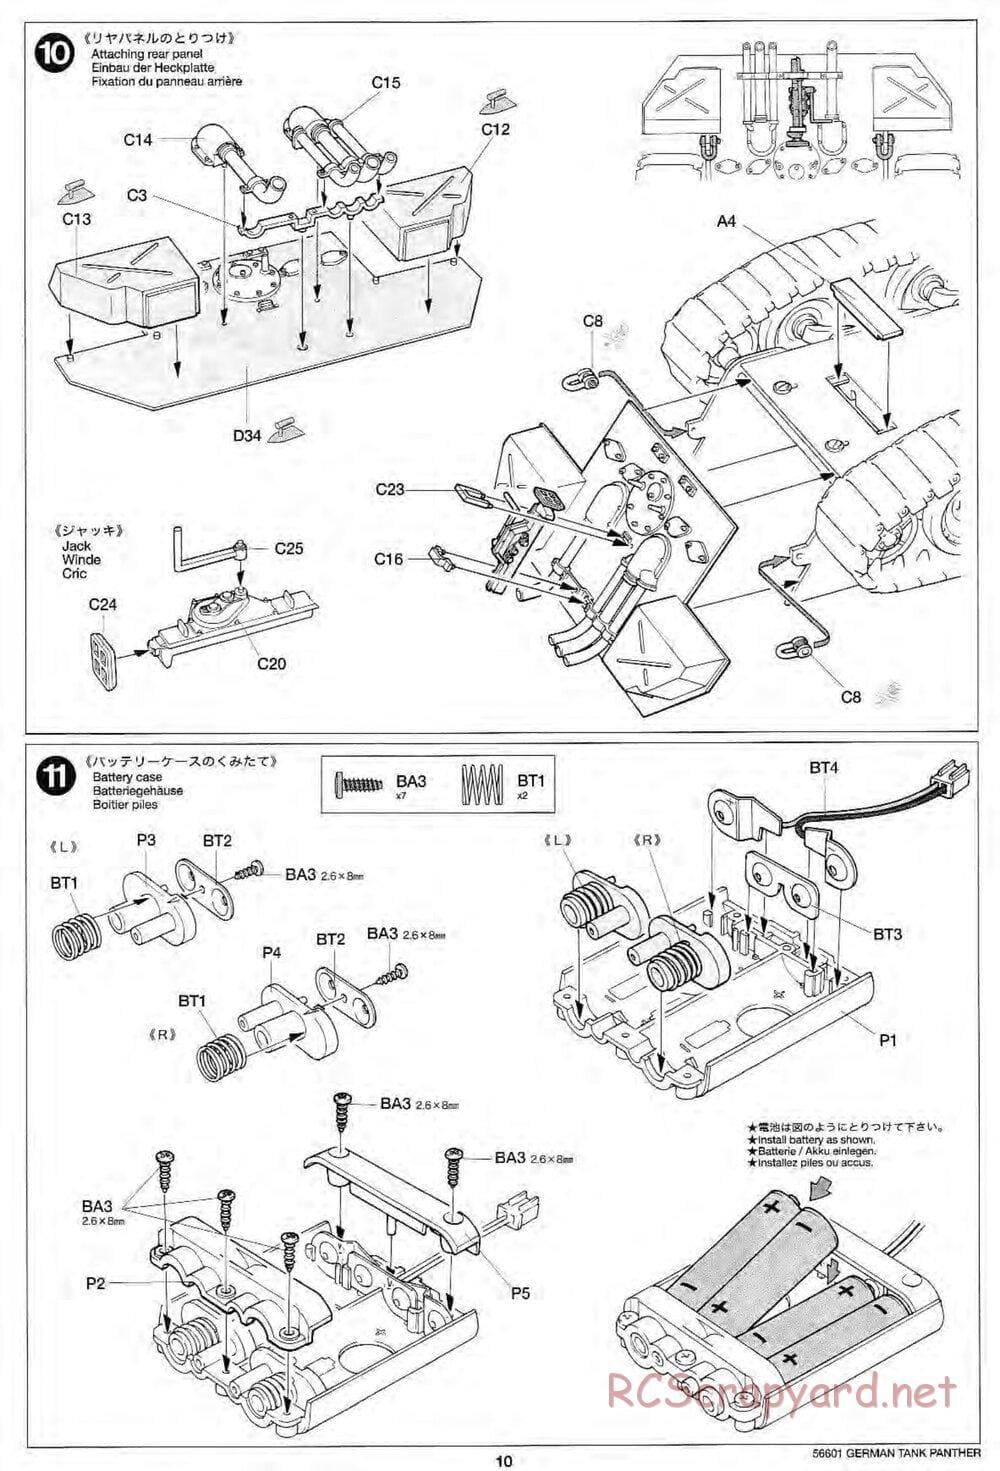 Tamiya - German Tank Panther A - 1/25 Scale Chassis - Manual - Page 10